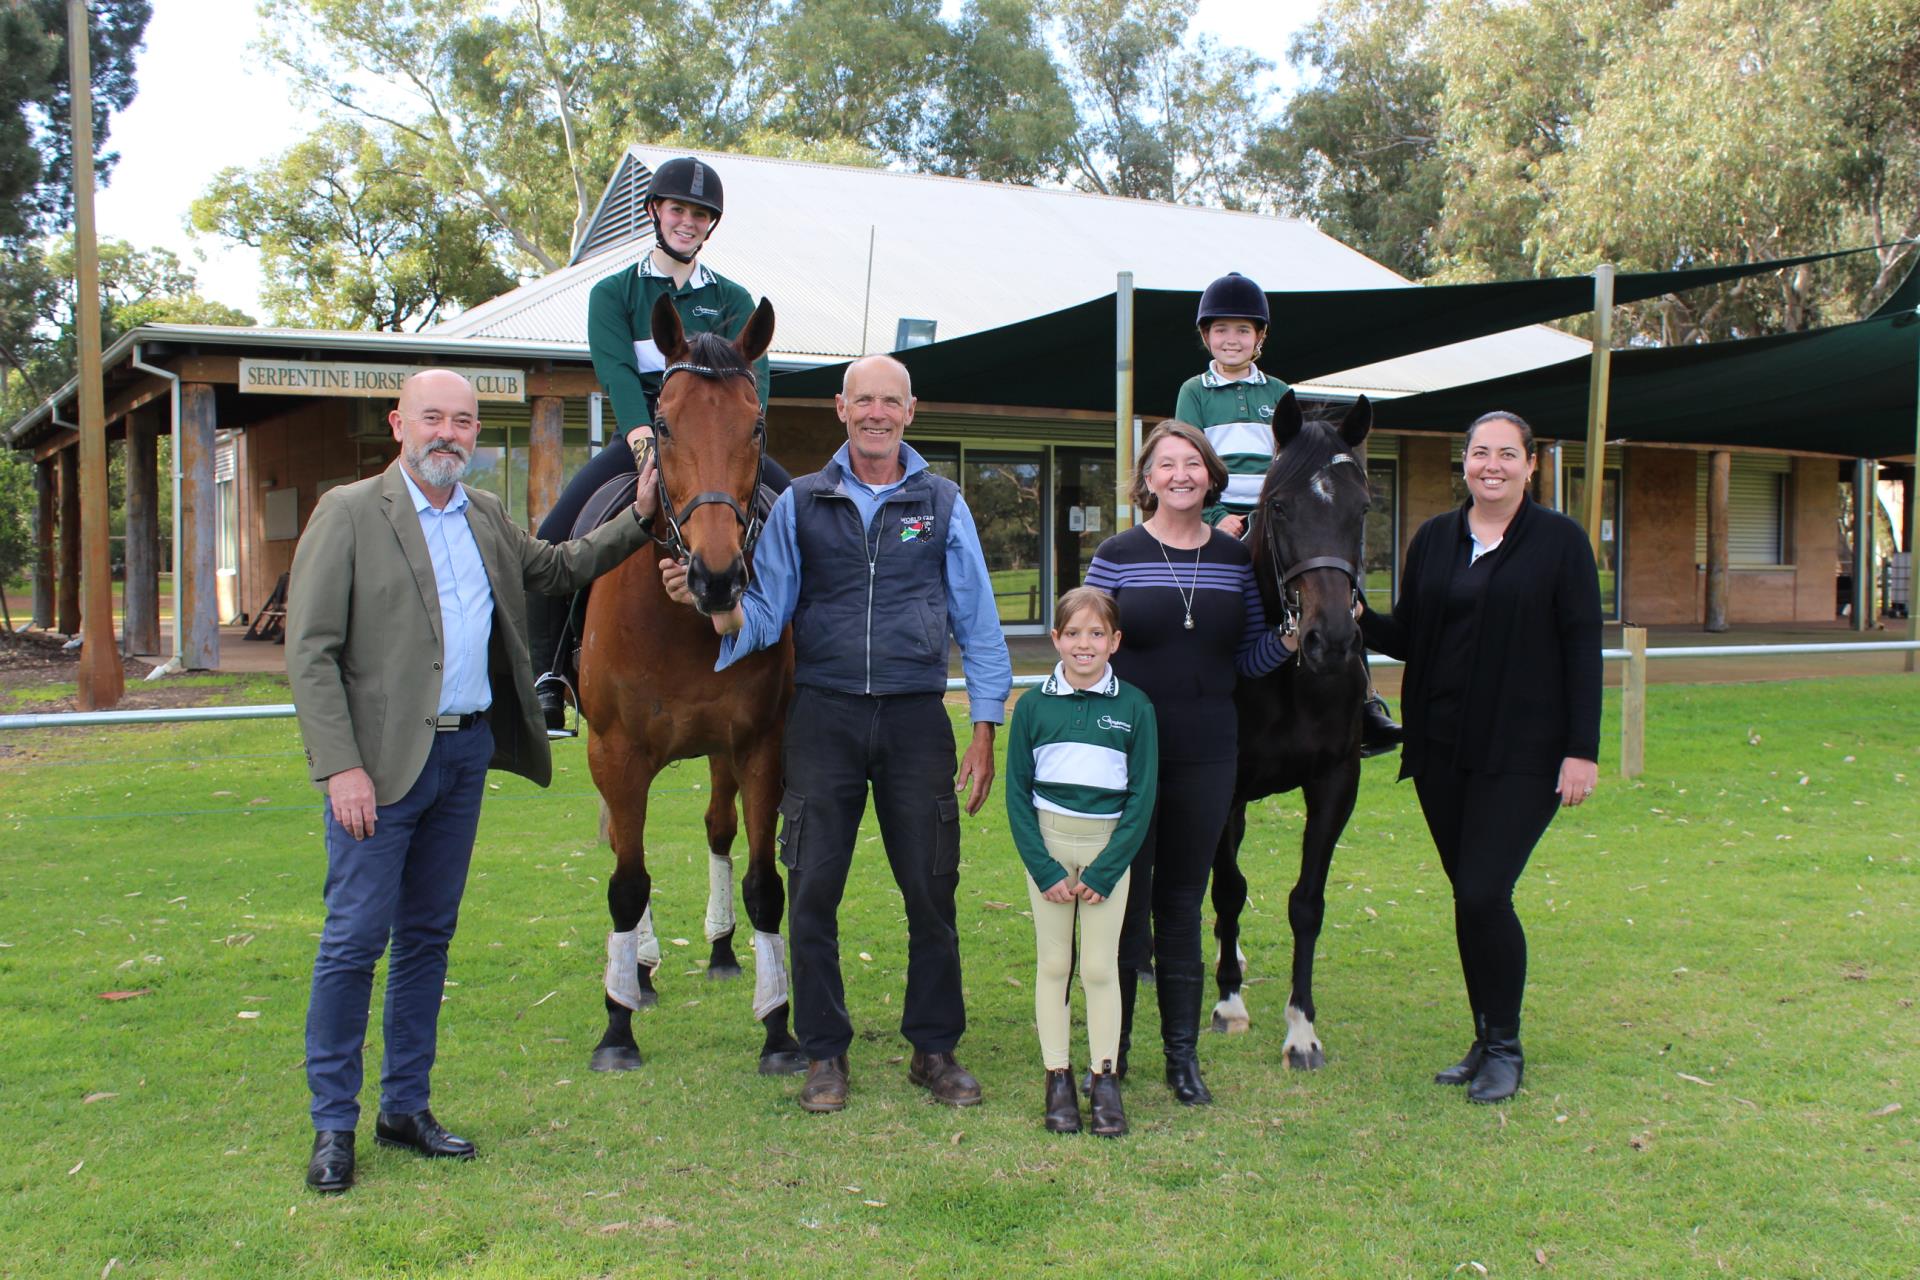 Brand new fencing a boost for SJ equestrian clubs